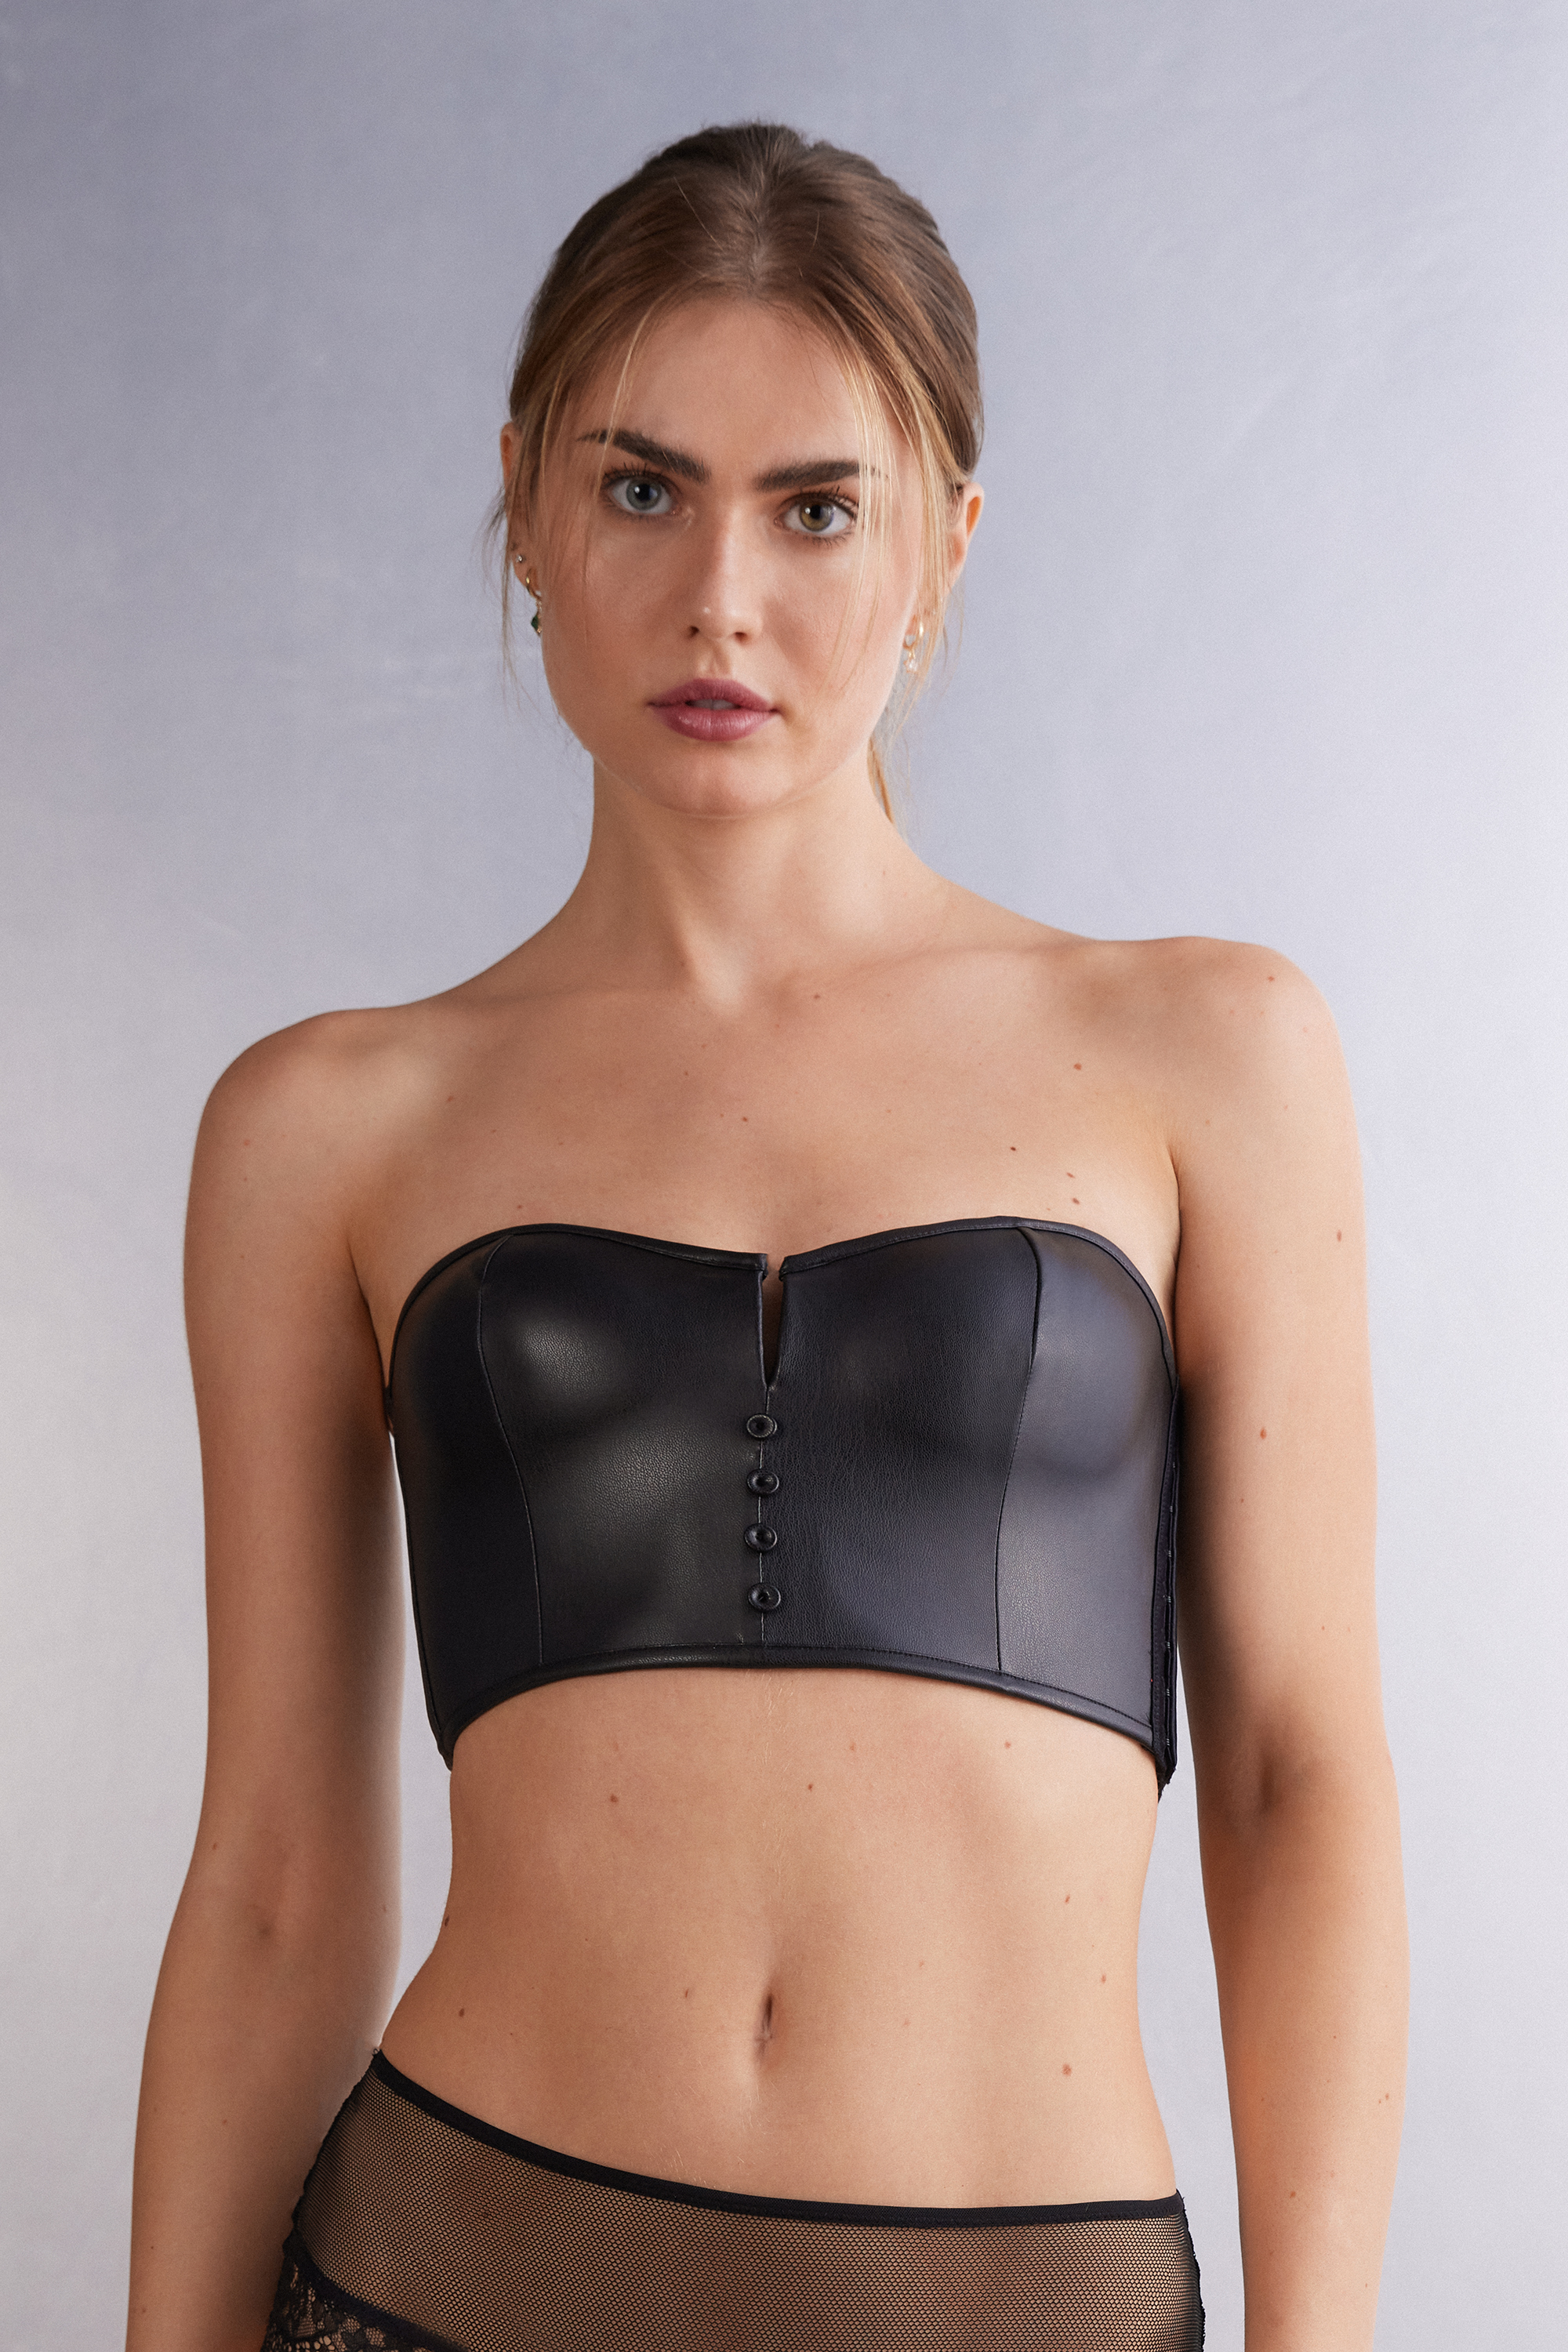 Iconic Beauty Bustier Bra Top - Intimissimi